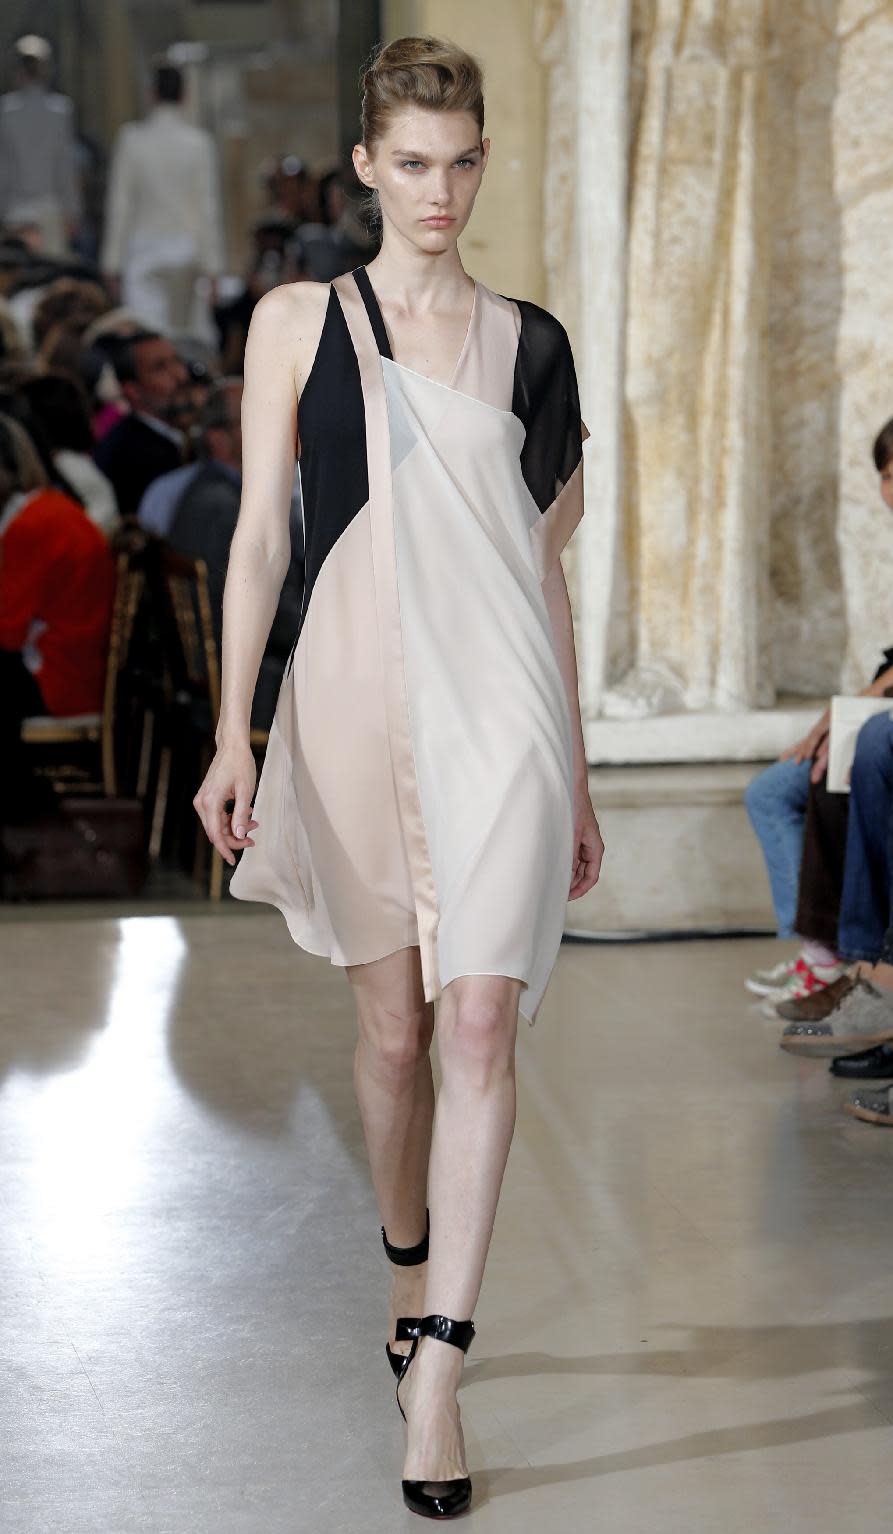 A model wears a creation by fashion designer Bouchra Jarrar during her Women's Fall Winter 2013-2014 haute couture fashion collection presented at Antoine Bourdelle Museum in Paris Tuesday, July 2, 2013 in Paris. (AP Photo/Jacques Brinon)